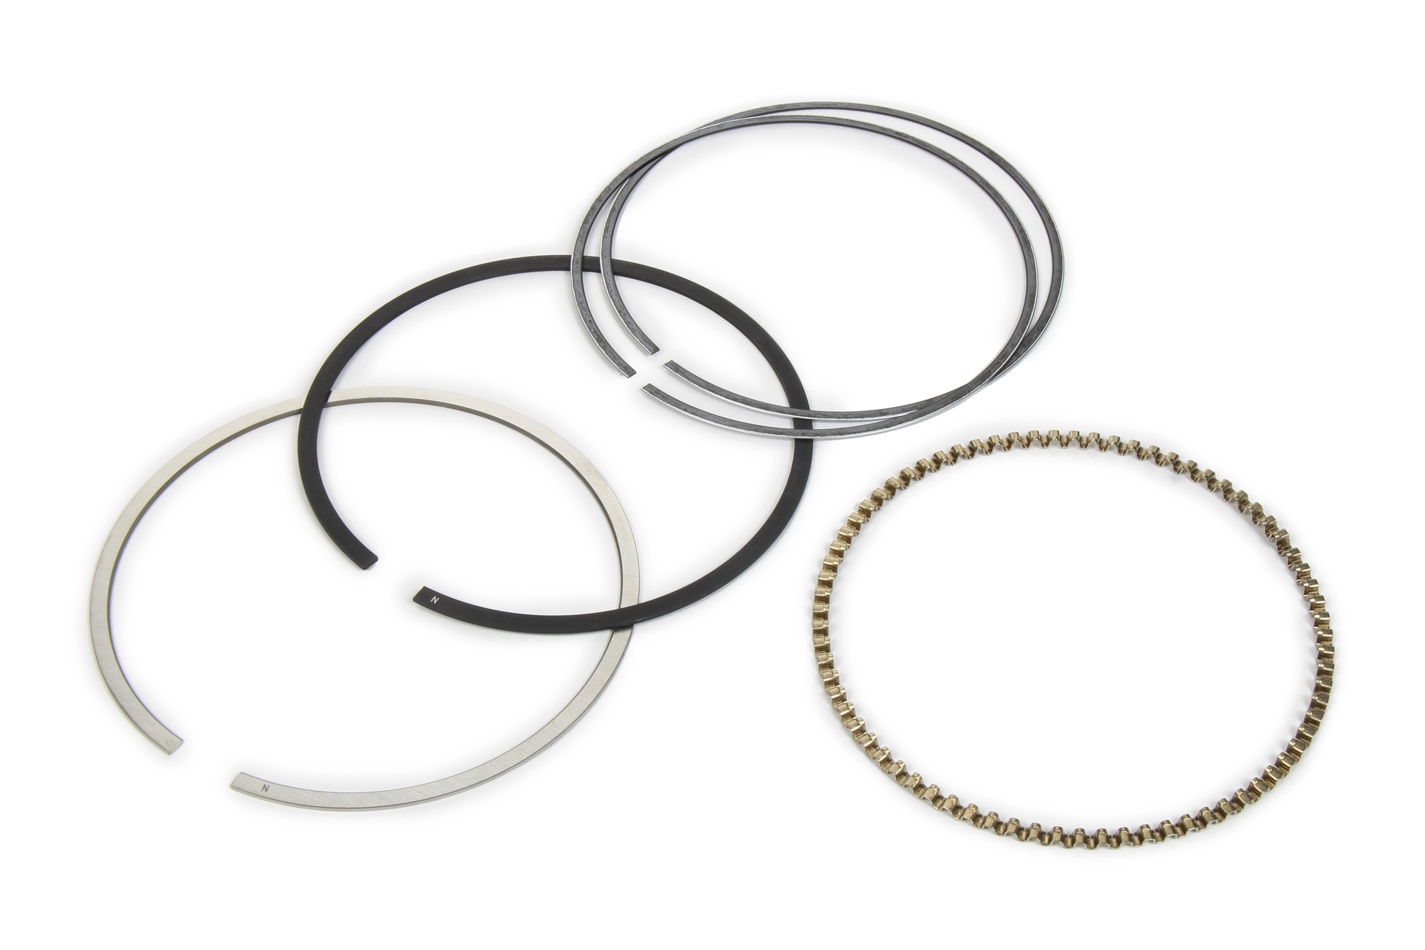 Piston Rings Standard Tension Stainless Steel 1.2 x 1.2 x 3.0 mm Thick 8 Cylinder Kit 4.025 in Bore